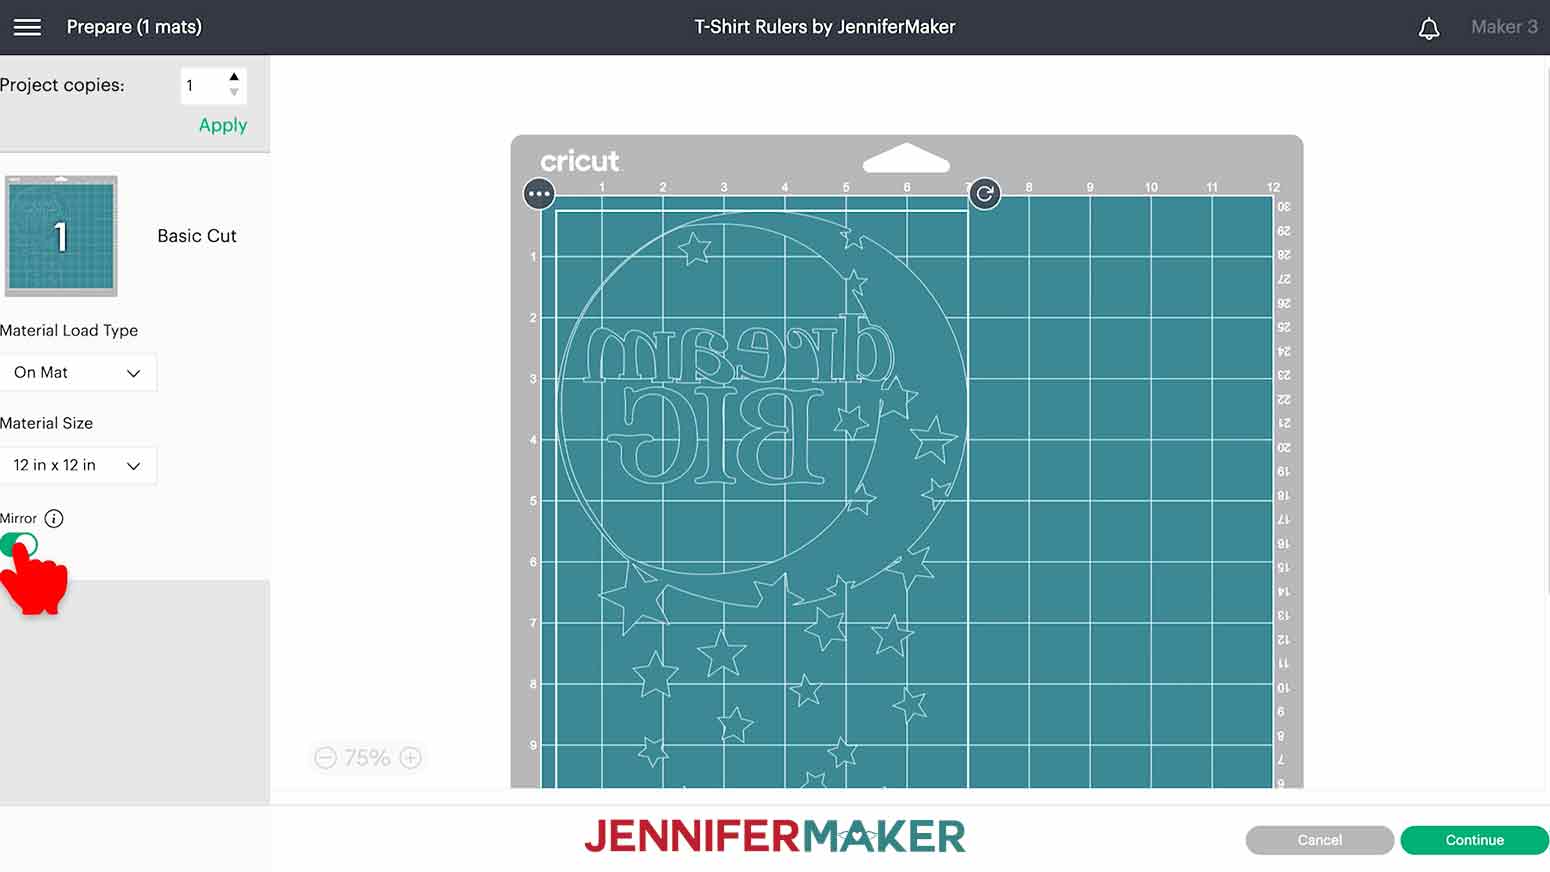 On the Cricut Design Space Prepare screen, the 'Mirror' selection is clicked to 'Mirror' for the Dream Big decal to be cut and used with the T-Shirt Ruler.